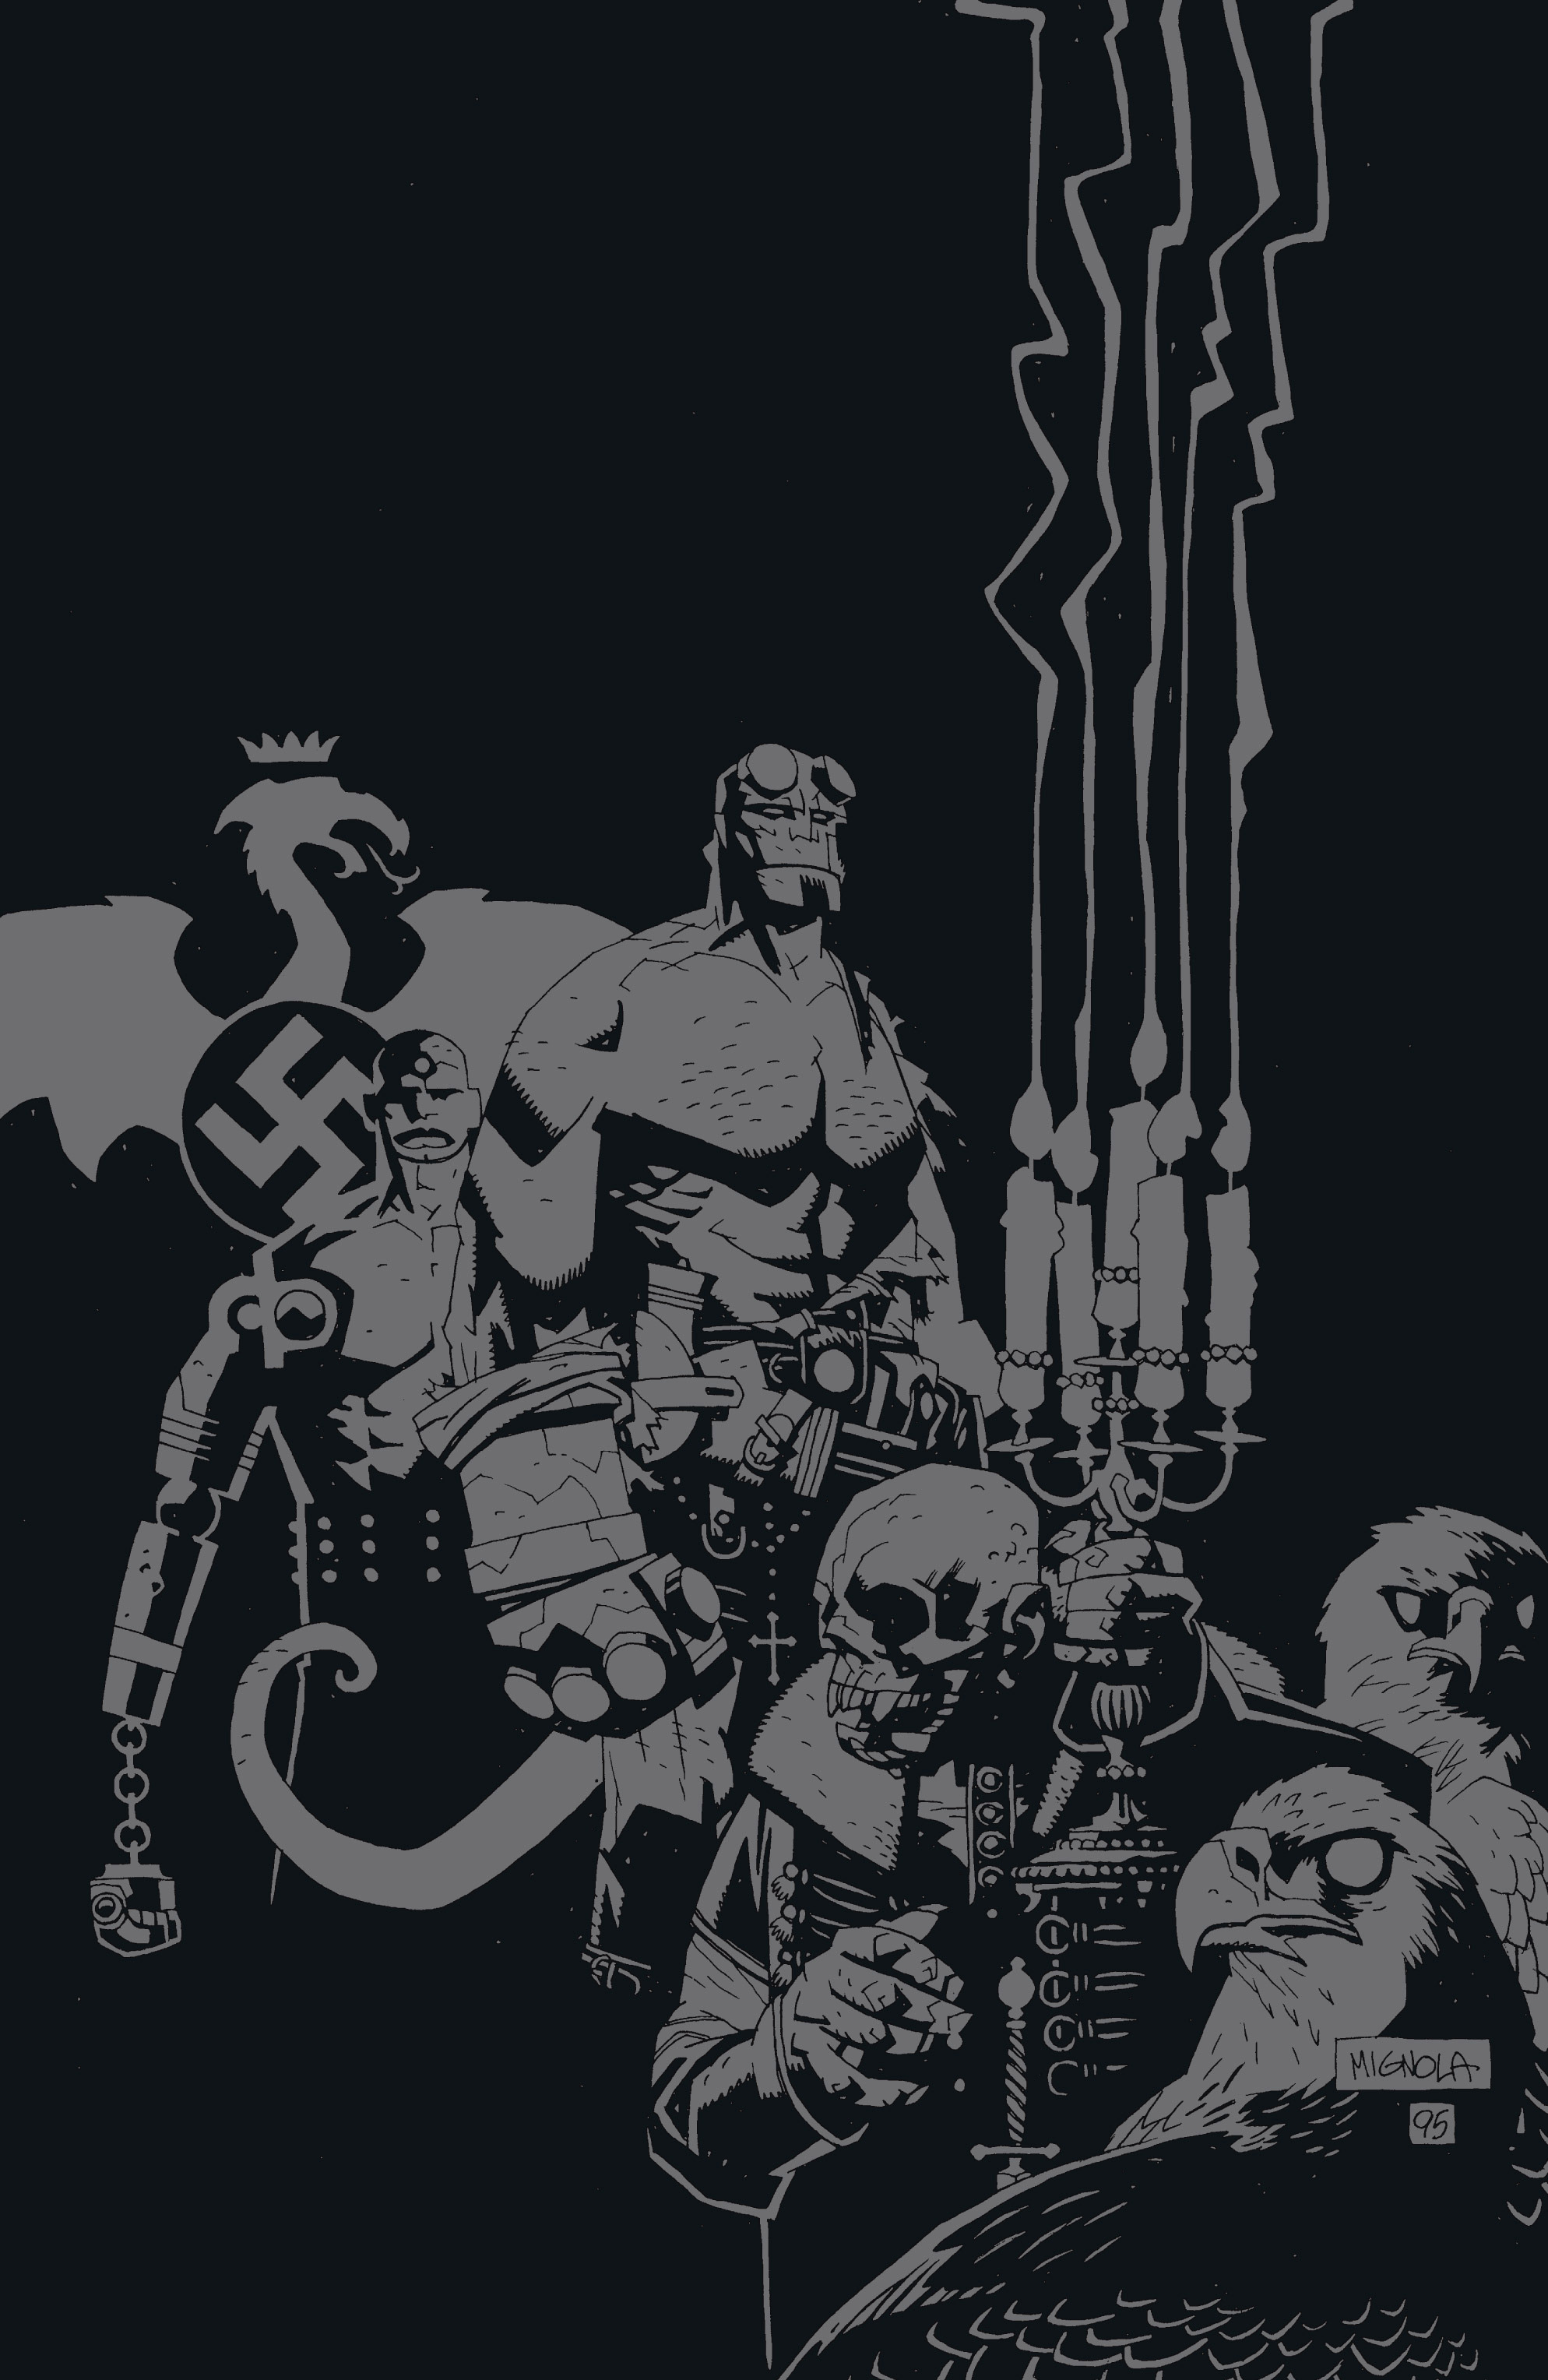 Read online Hellboy comic -  Issue #2 - 34